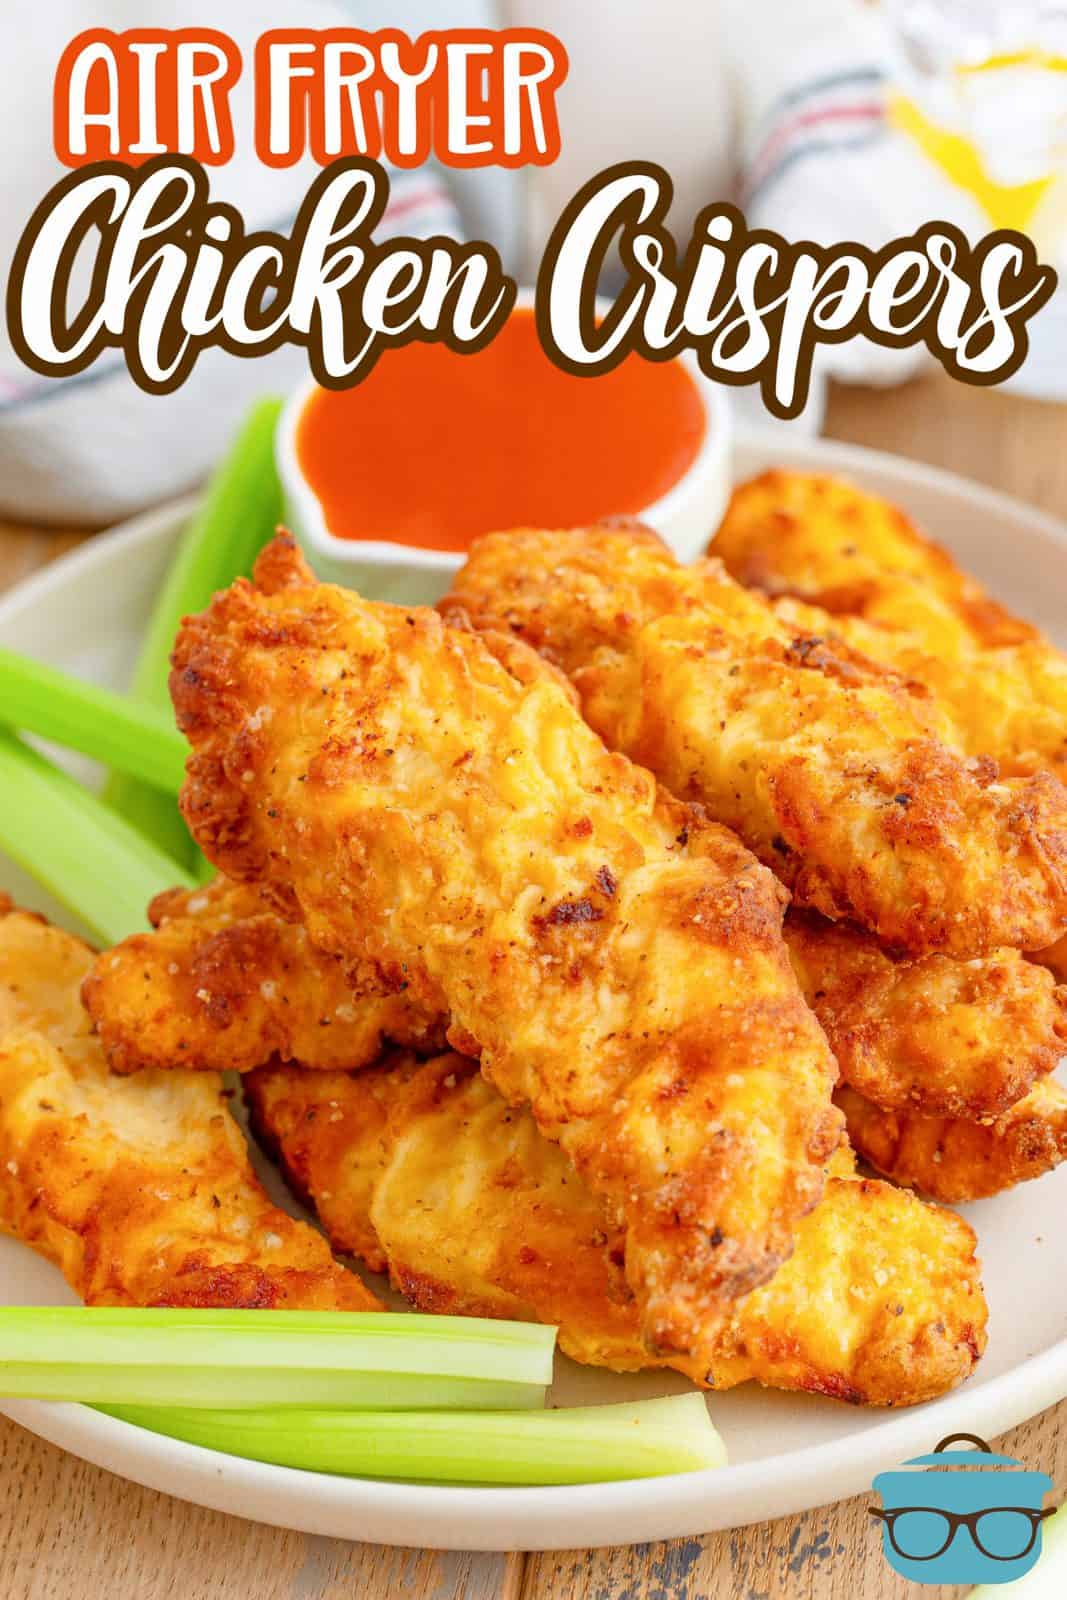 Stacked Air Fryer Chicken Crispers on plate with celery and dipping sauce Pinterest image